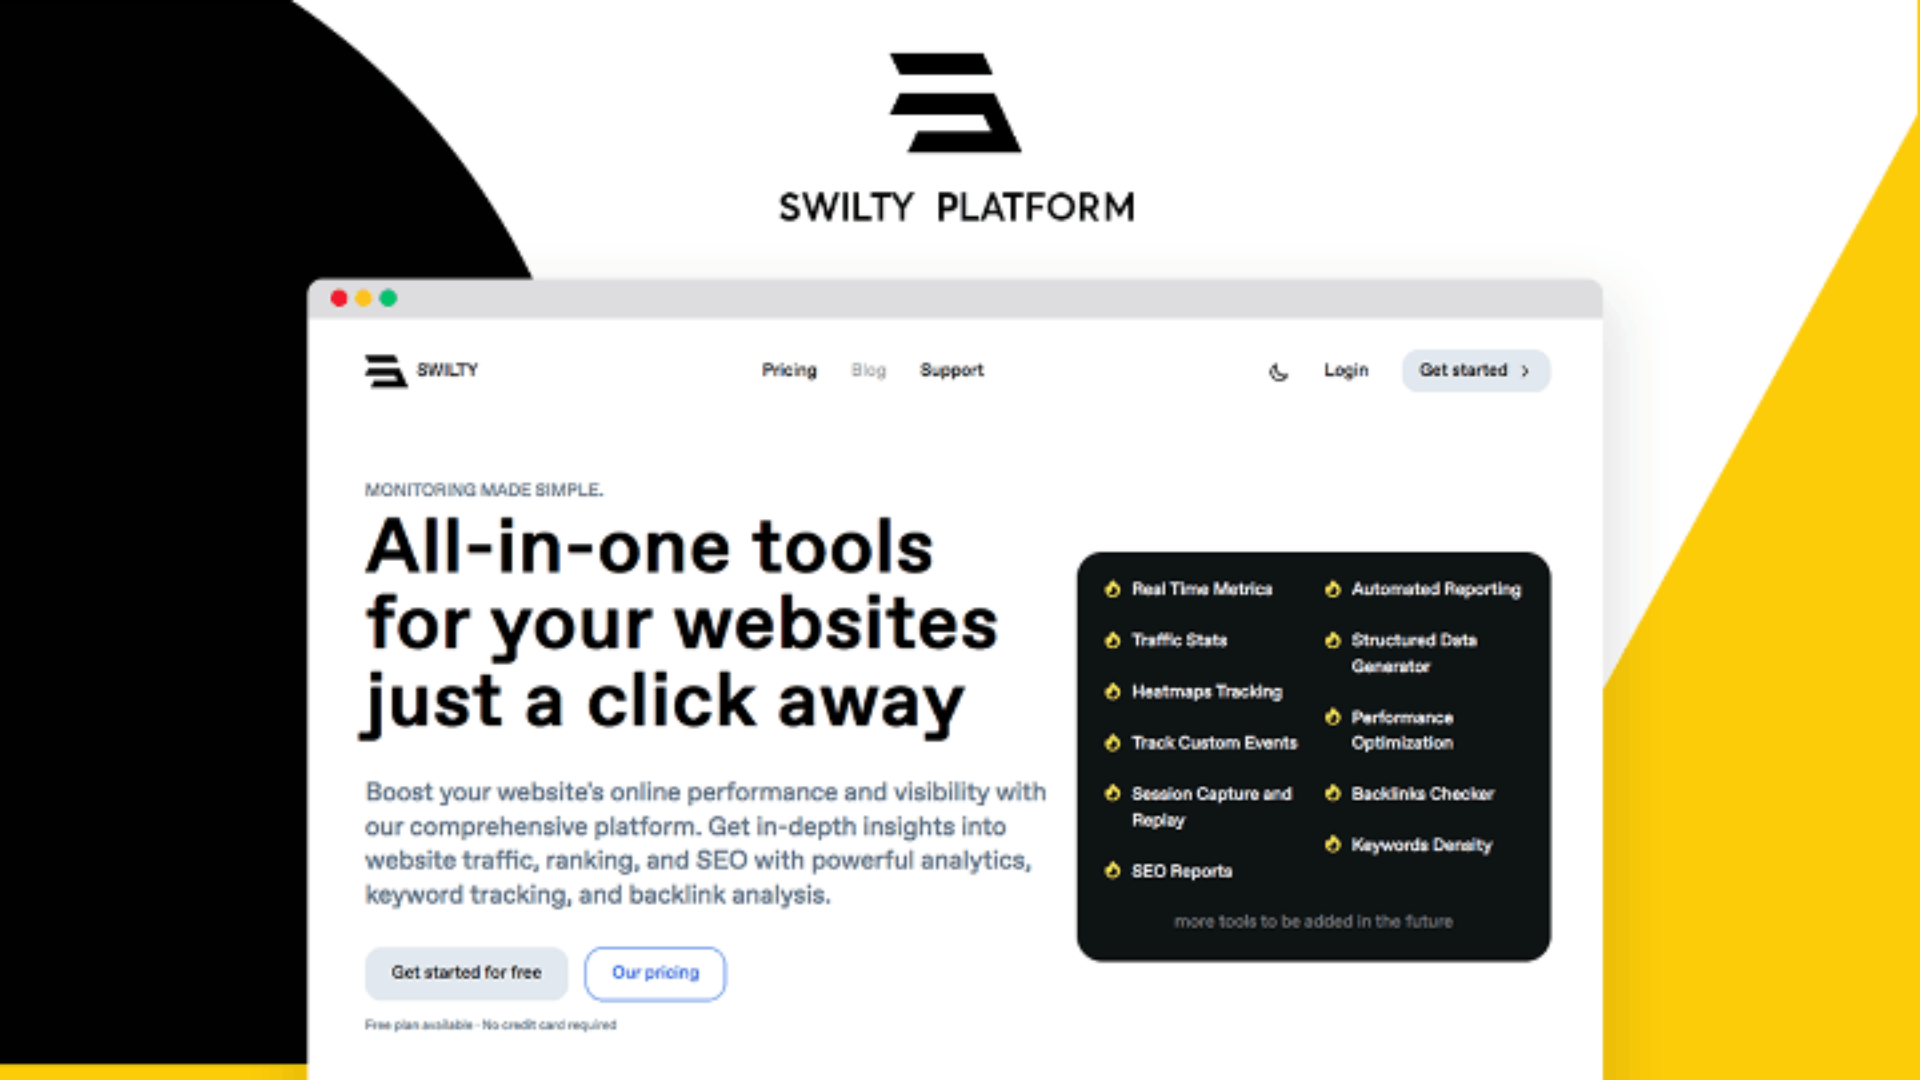 Lifetime Deal to Swilty Platform – All-in-one tools: Agency for $200